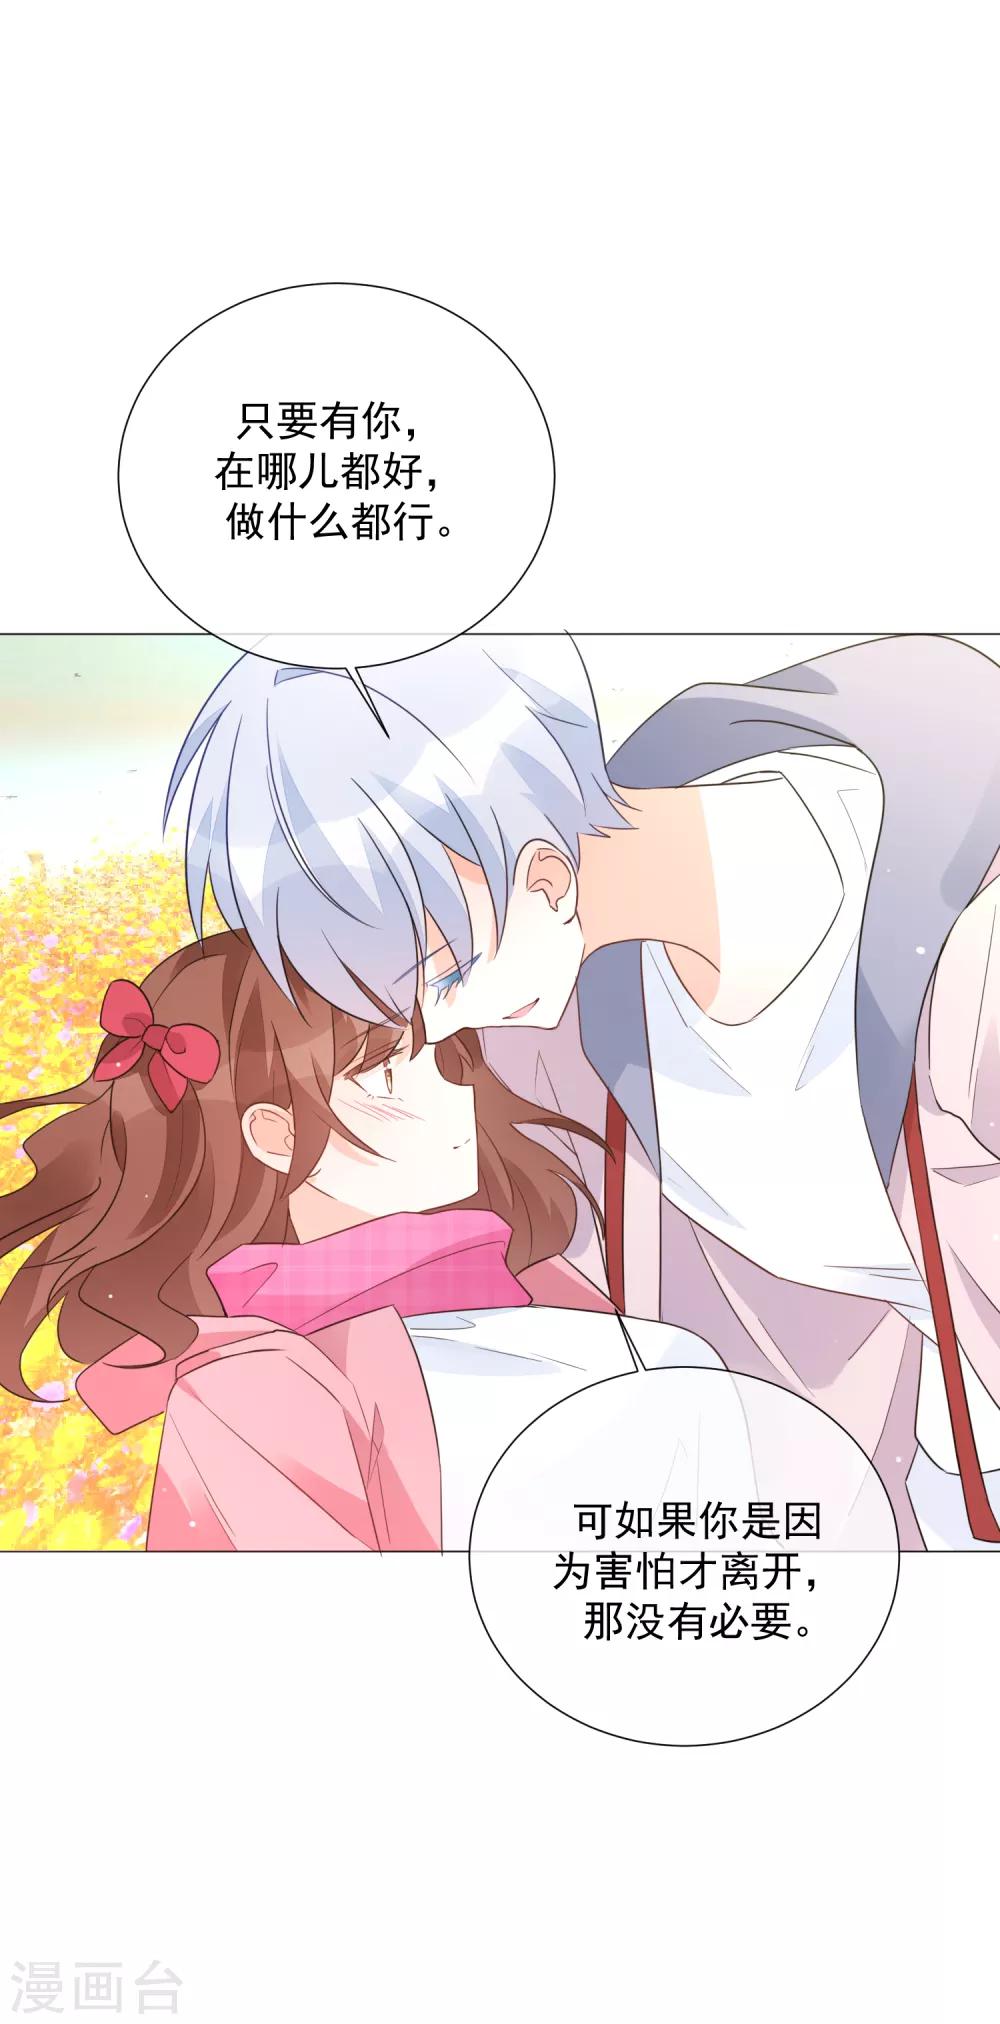 One Kiss A Day - 第87话 不好的预感 - 2